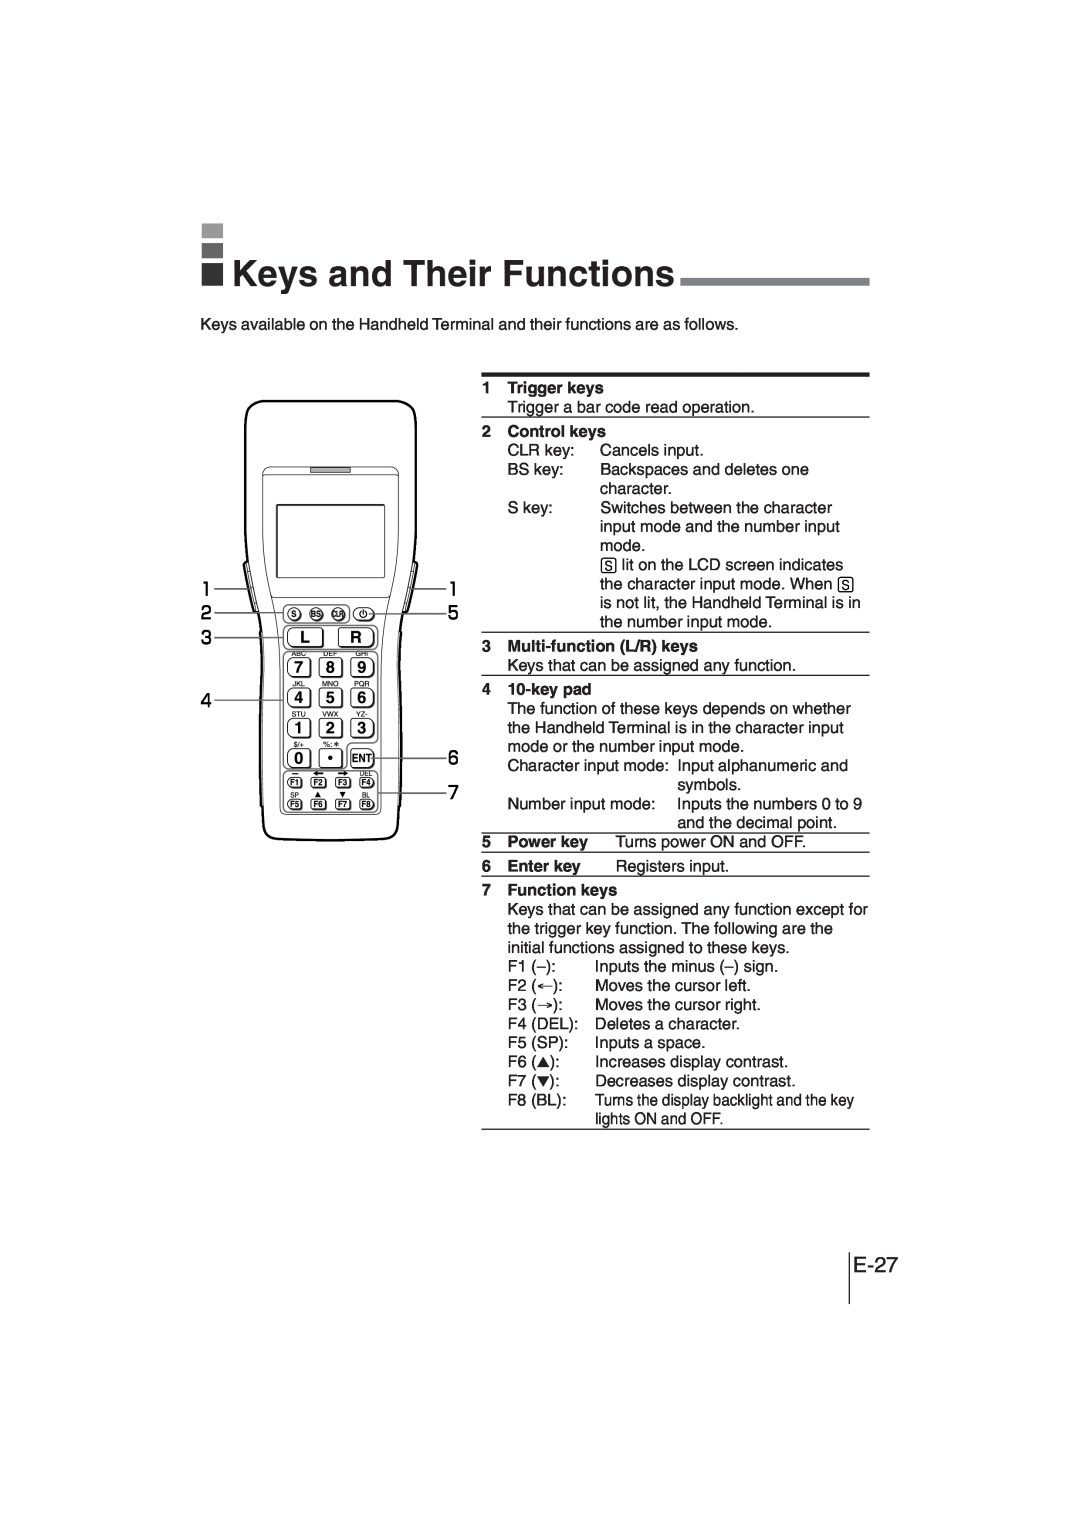 Casio DT-930 manual Keys and Their Functions, E-27 